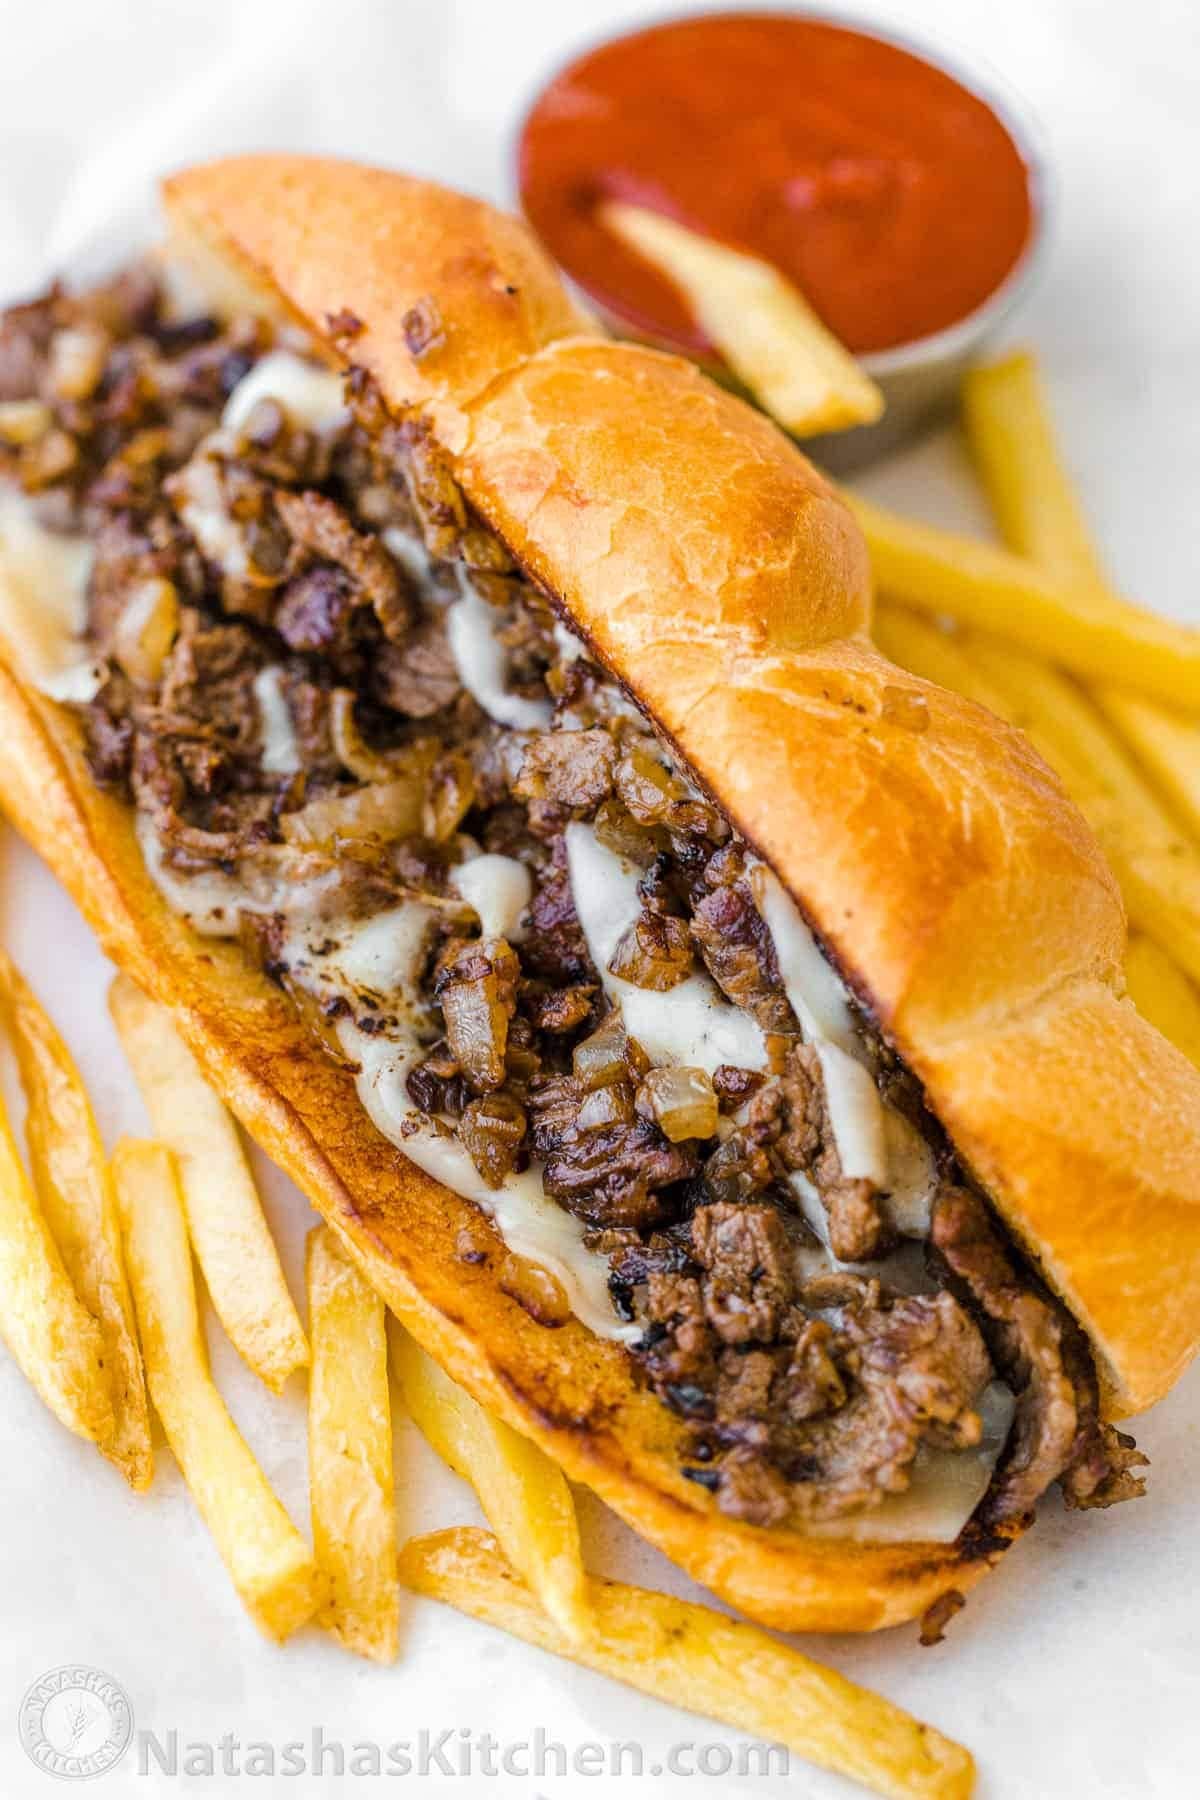 Tender ribeye steak, melted gooey provolone, and caramelized onions hugged by a toasted garlic butter hoagie roll with fries and French dip on the side